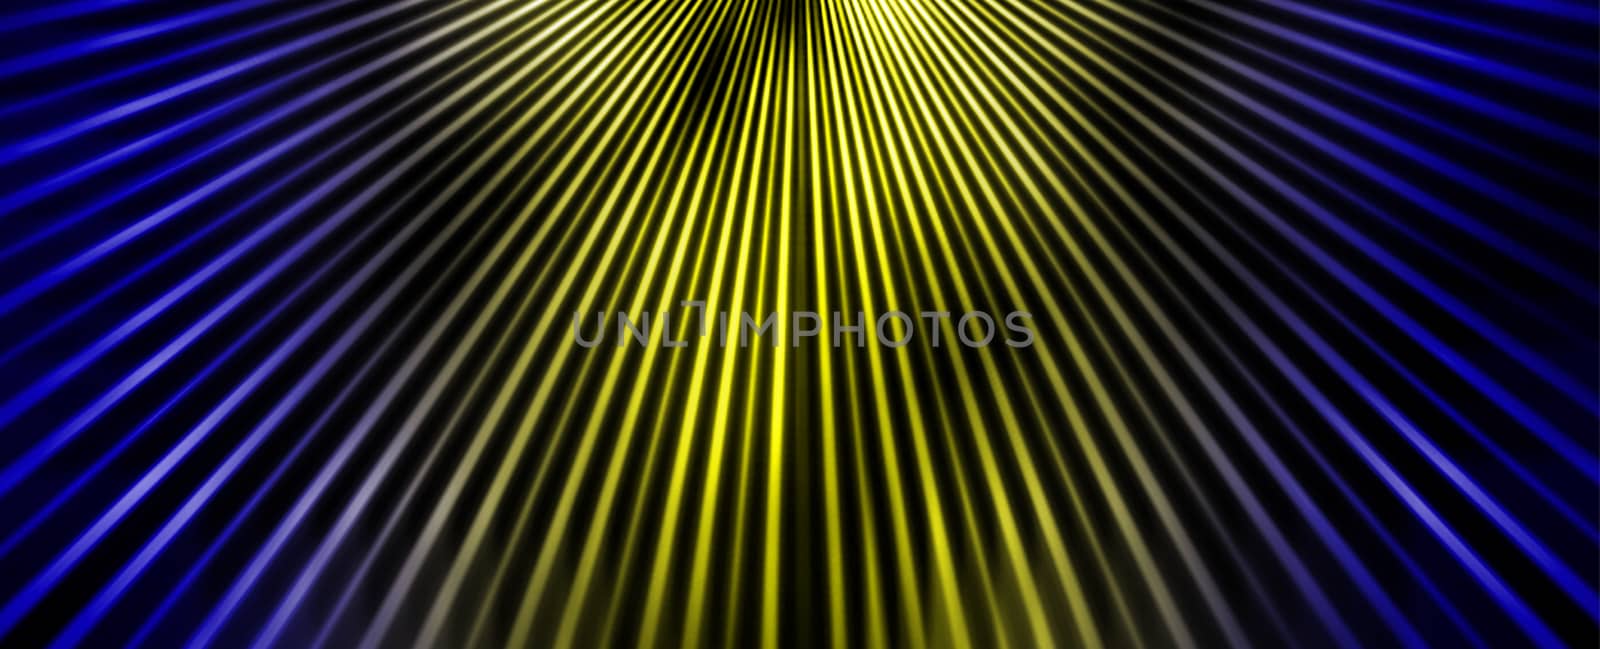 Blue and yellow beams abstract background for design with radial blur. Gradient.